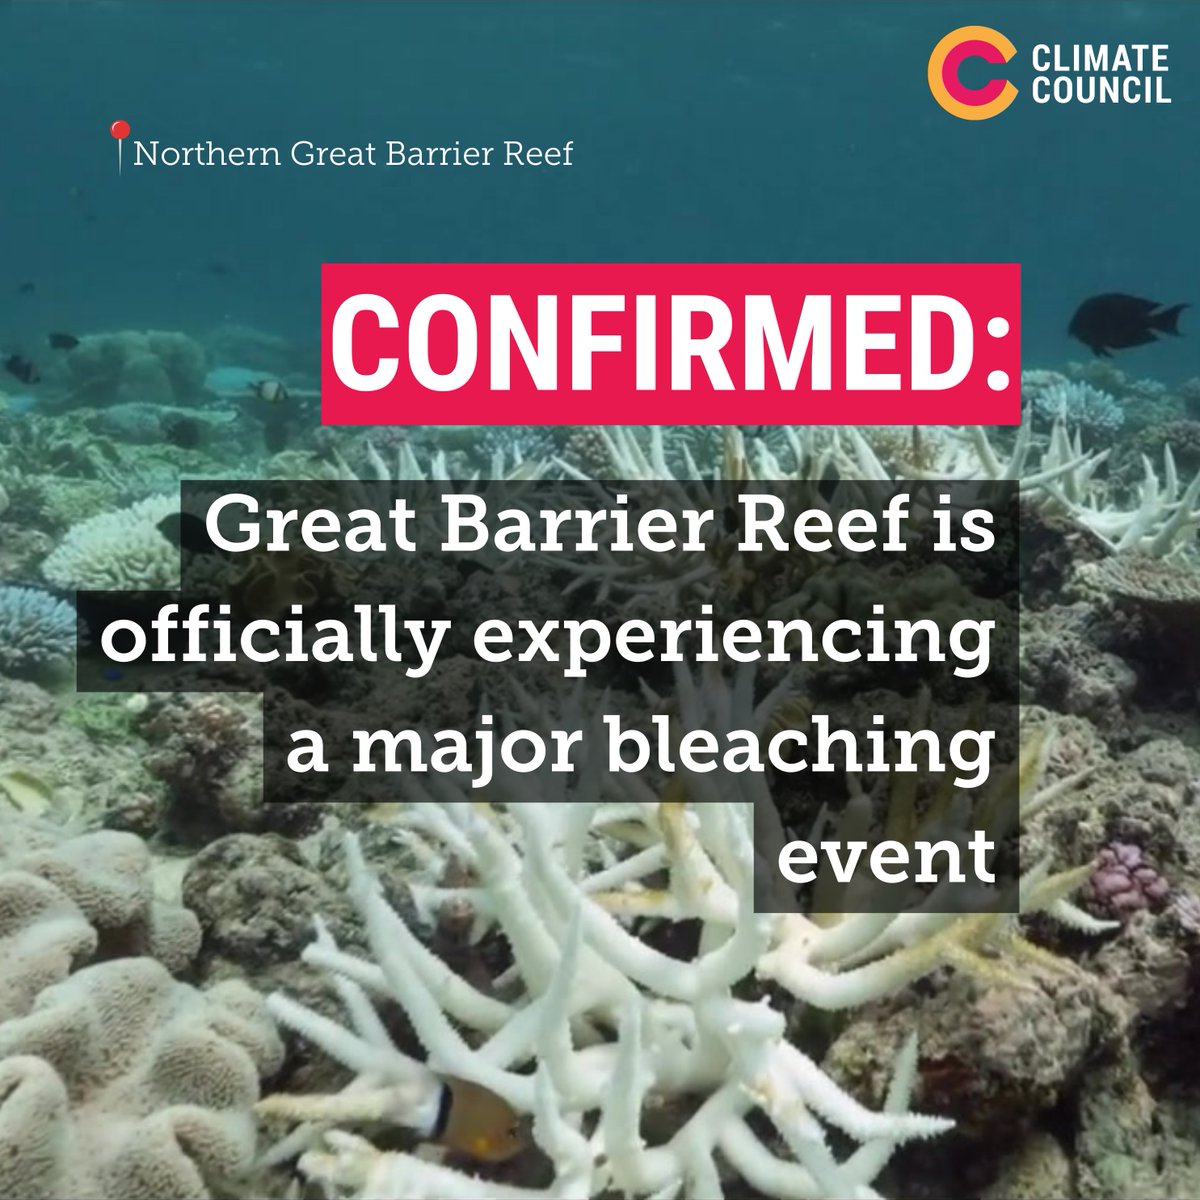 The Great Barrier Reef is officially facing its fifth major bleaching event in eight years, experts confirmed today.